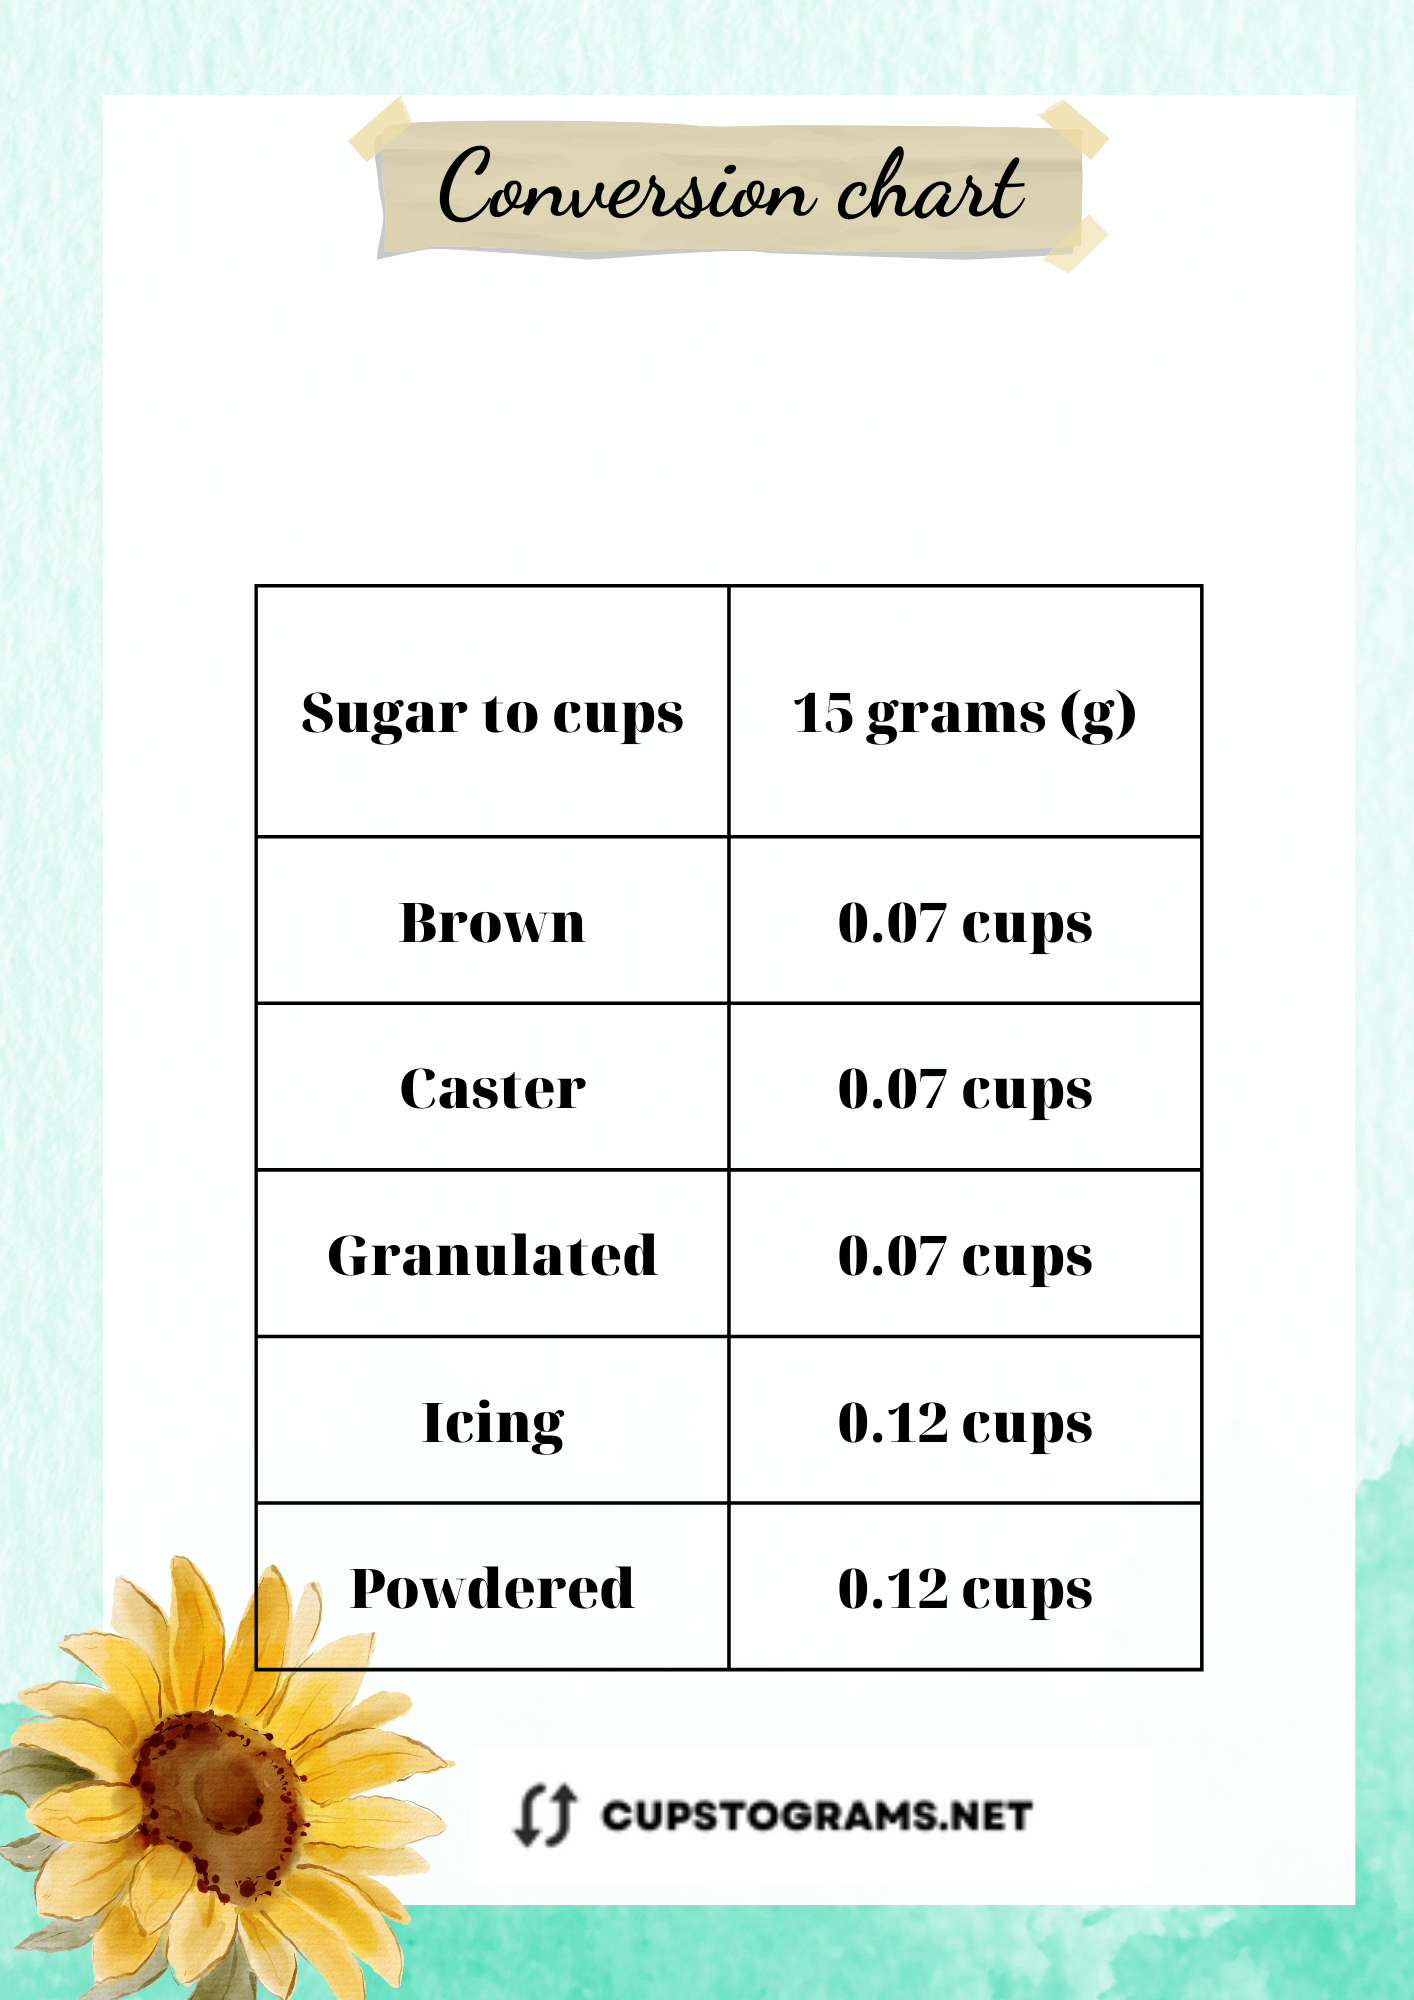 Table of conversions for 15 grams sugar to cups